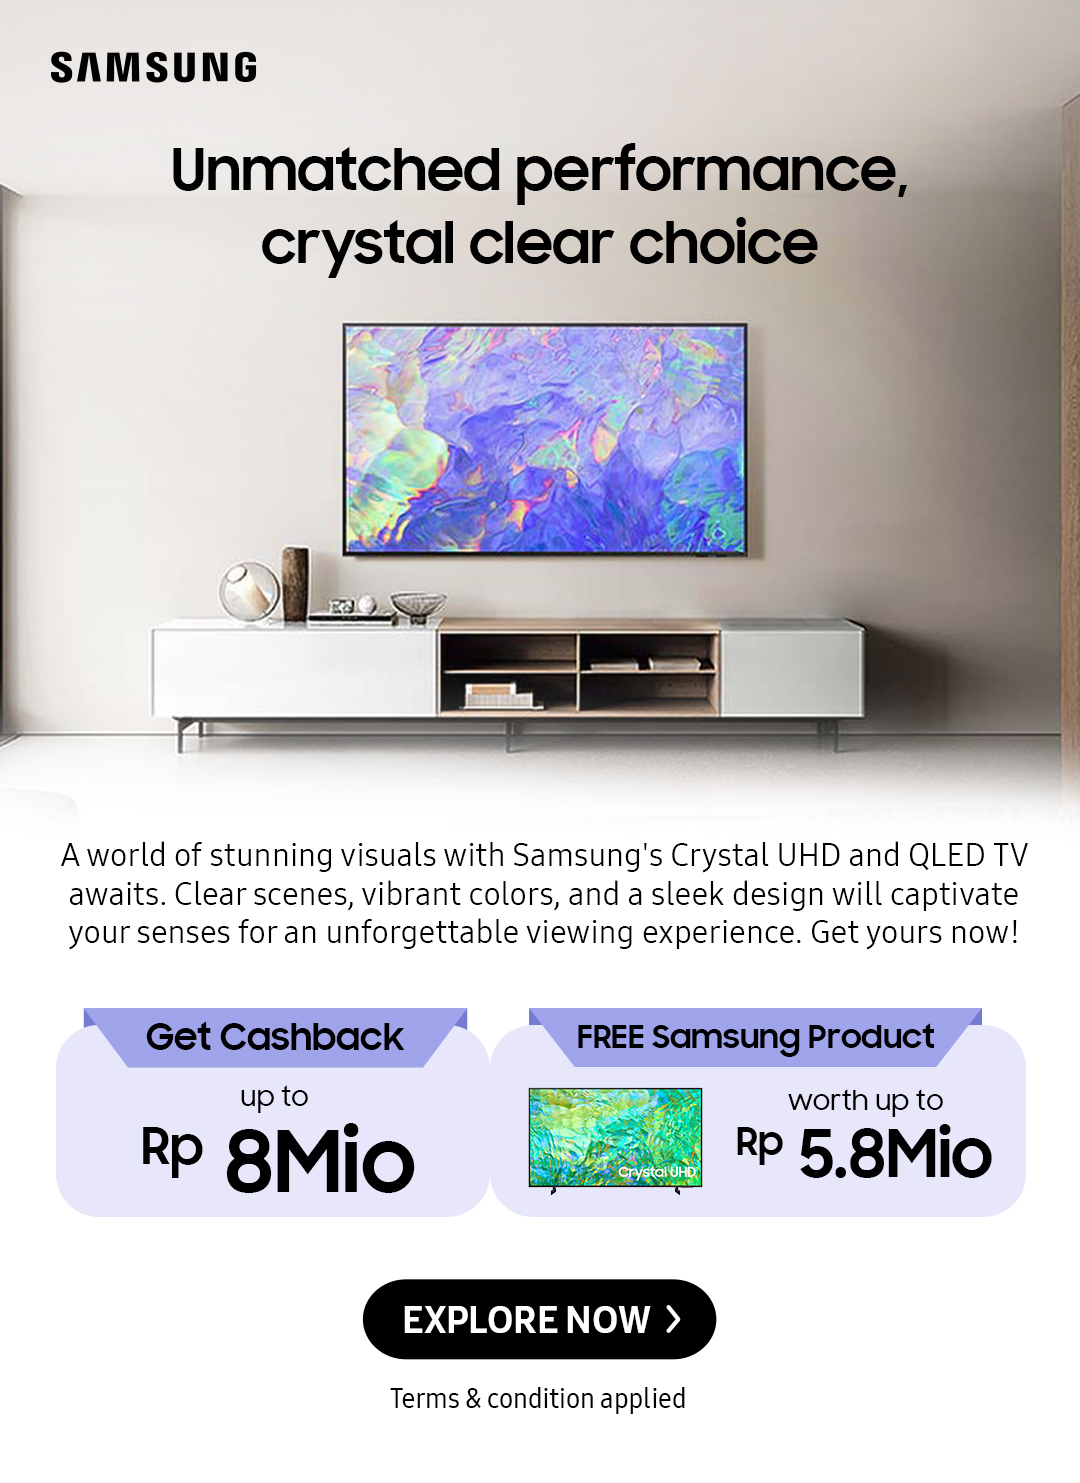 Unmatched performance, crystal clear choice | A world of stunning visuals with Samsung's Crystal UHD and QLED TV awaits. Clear scenes, vibrant colors, and a sleek design will captivate your senses for an unforgettable viewing experience. Get yours now!